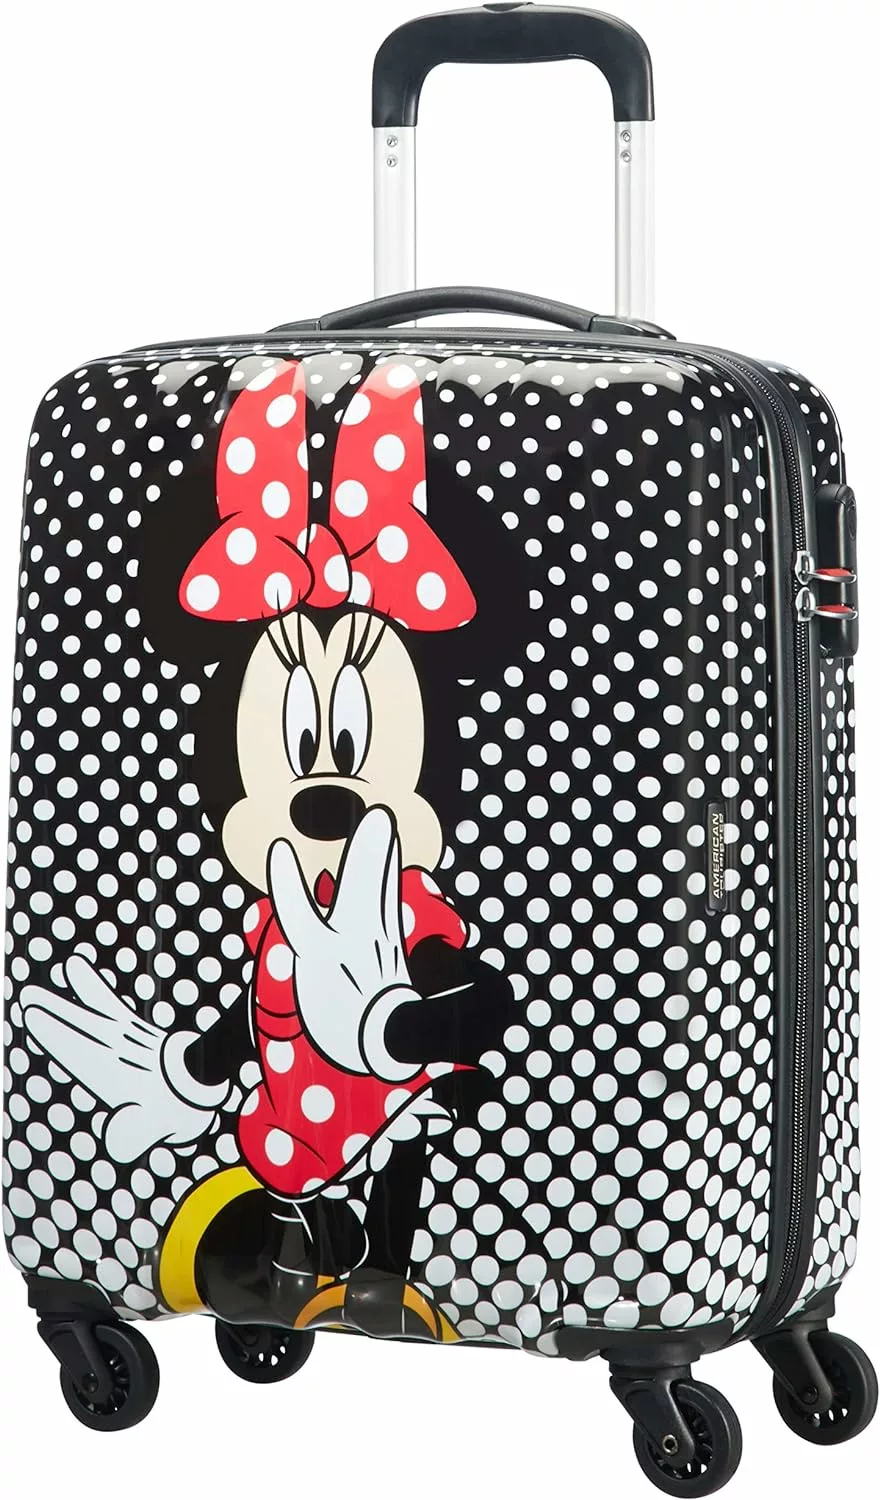 American Tourister Disney Legends - Spinner S, Kids luggage, 55 cm, 36 L, Multicolour (Minnie Mouse Polka Dot)